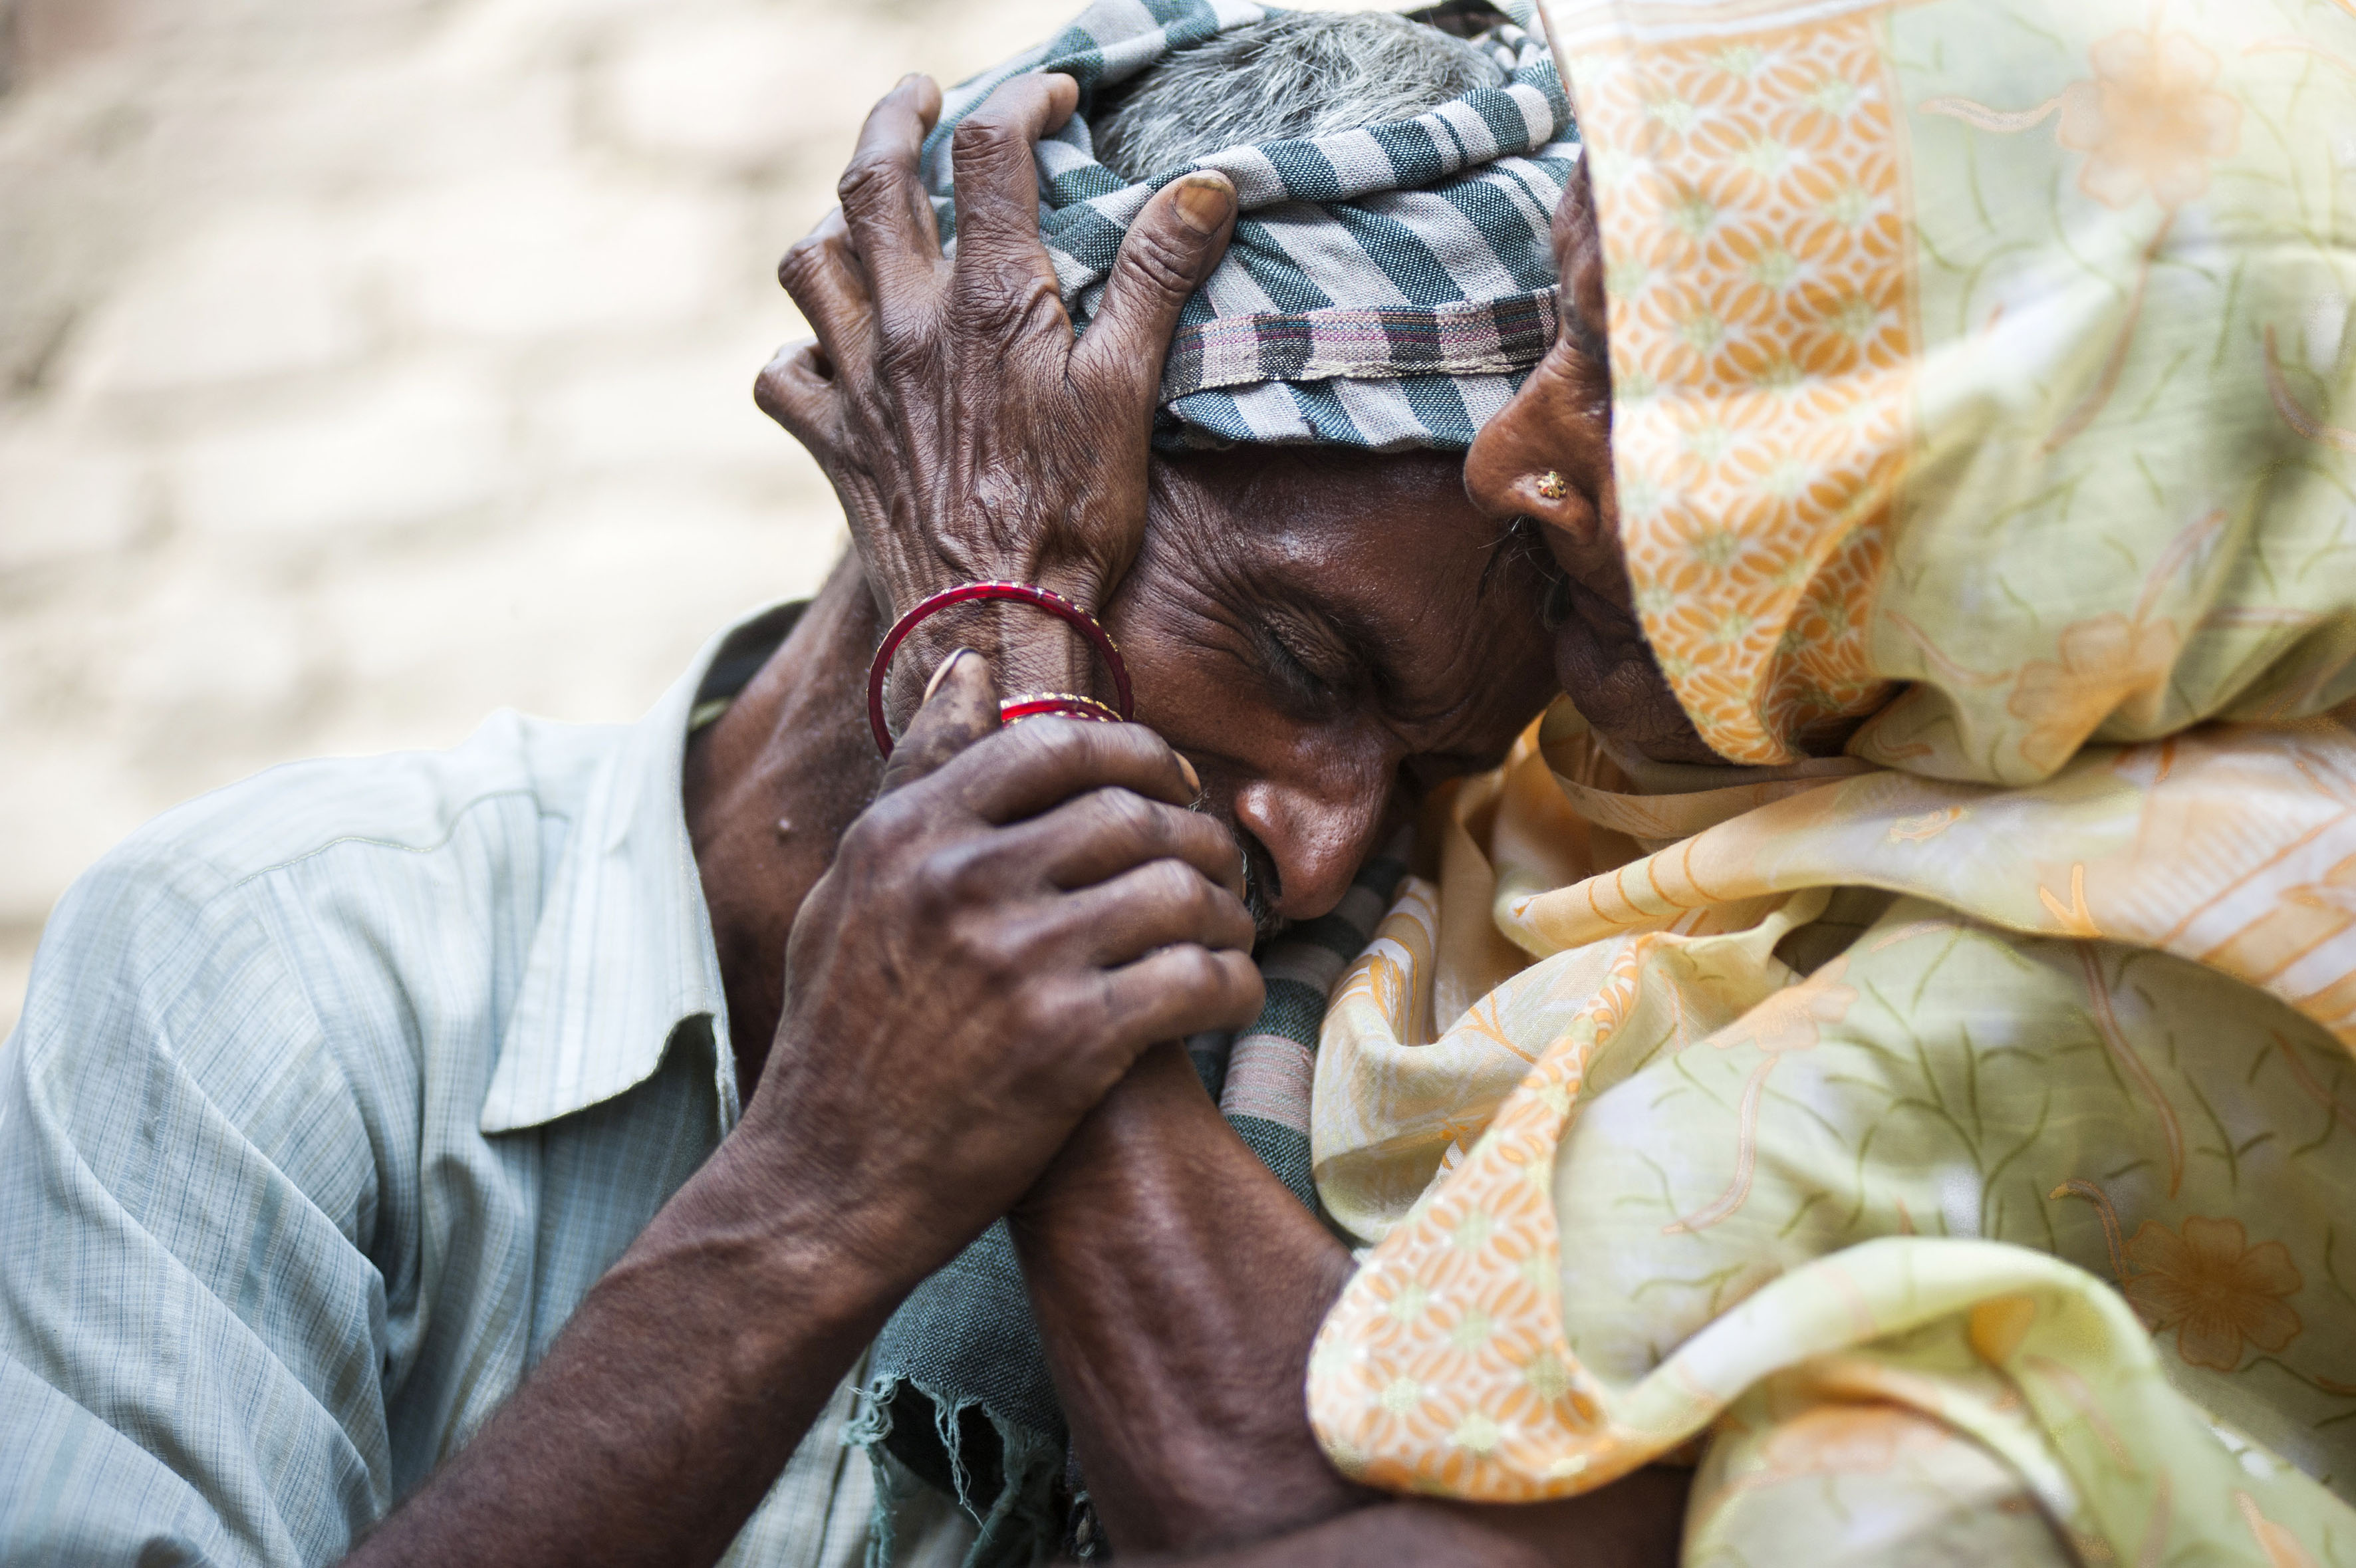 Sohan Lal (55) father of raped and murdered daughter Murti weeps and is comforted by his mother Ramkali in Katra Sadatganj village, Uttar Pradesh, India on May 30, 2014.